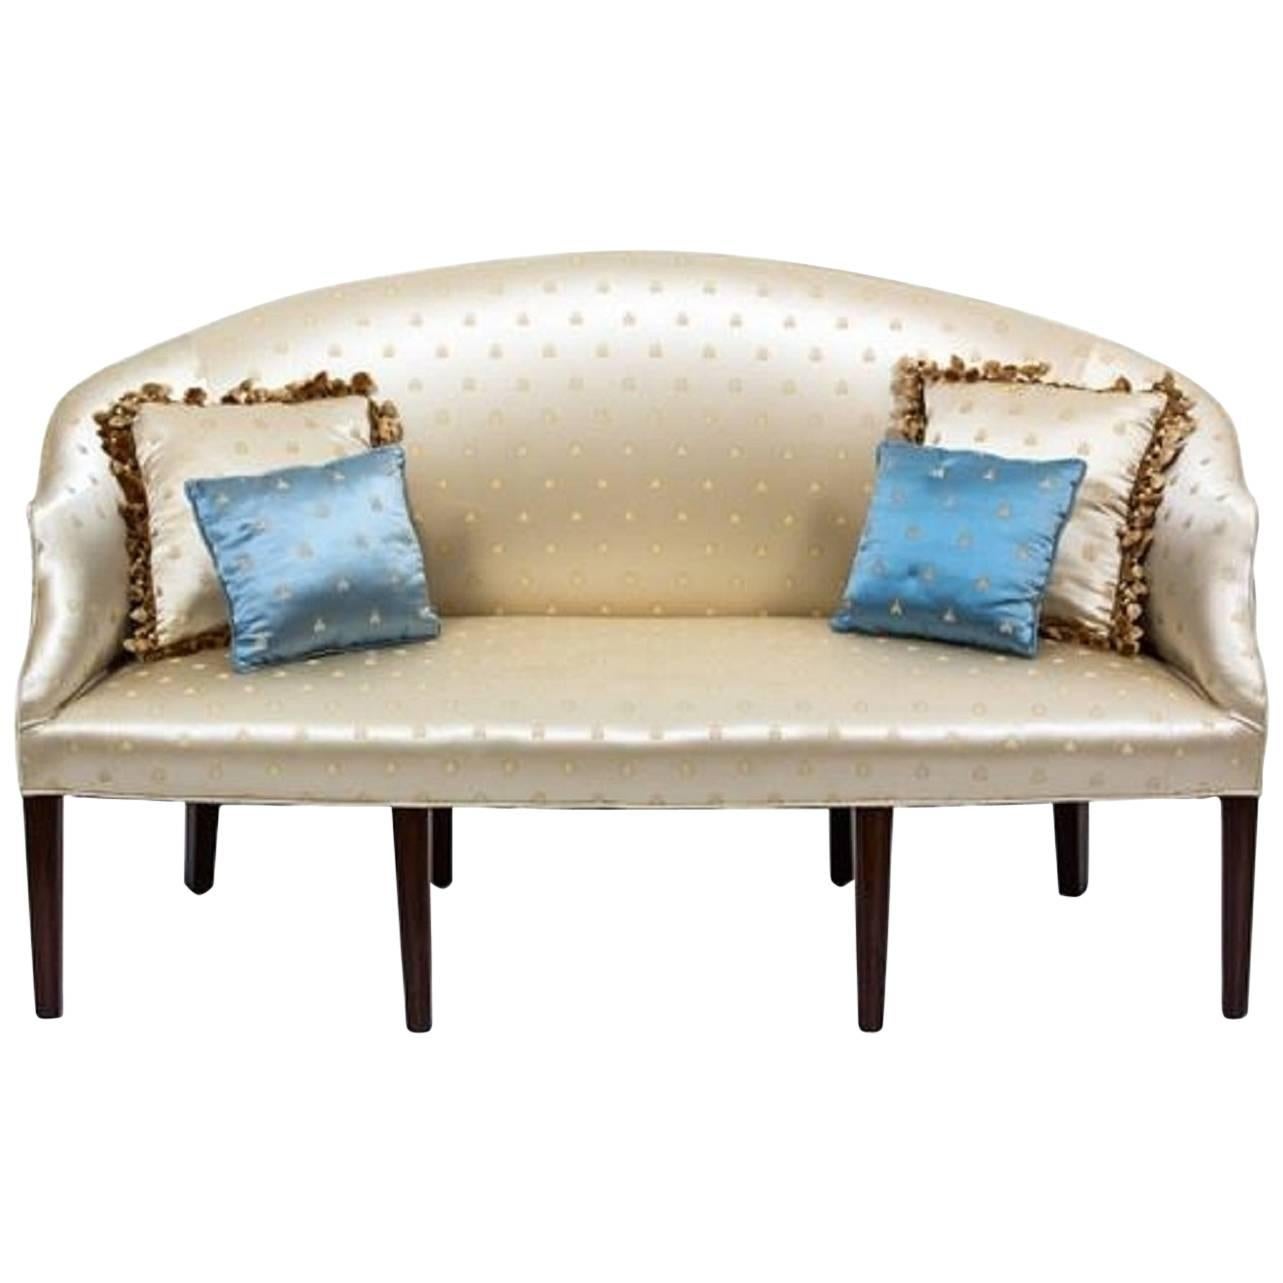 George III Style Mahogany Upholstered Settee, Early 20th Century